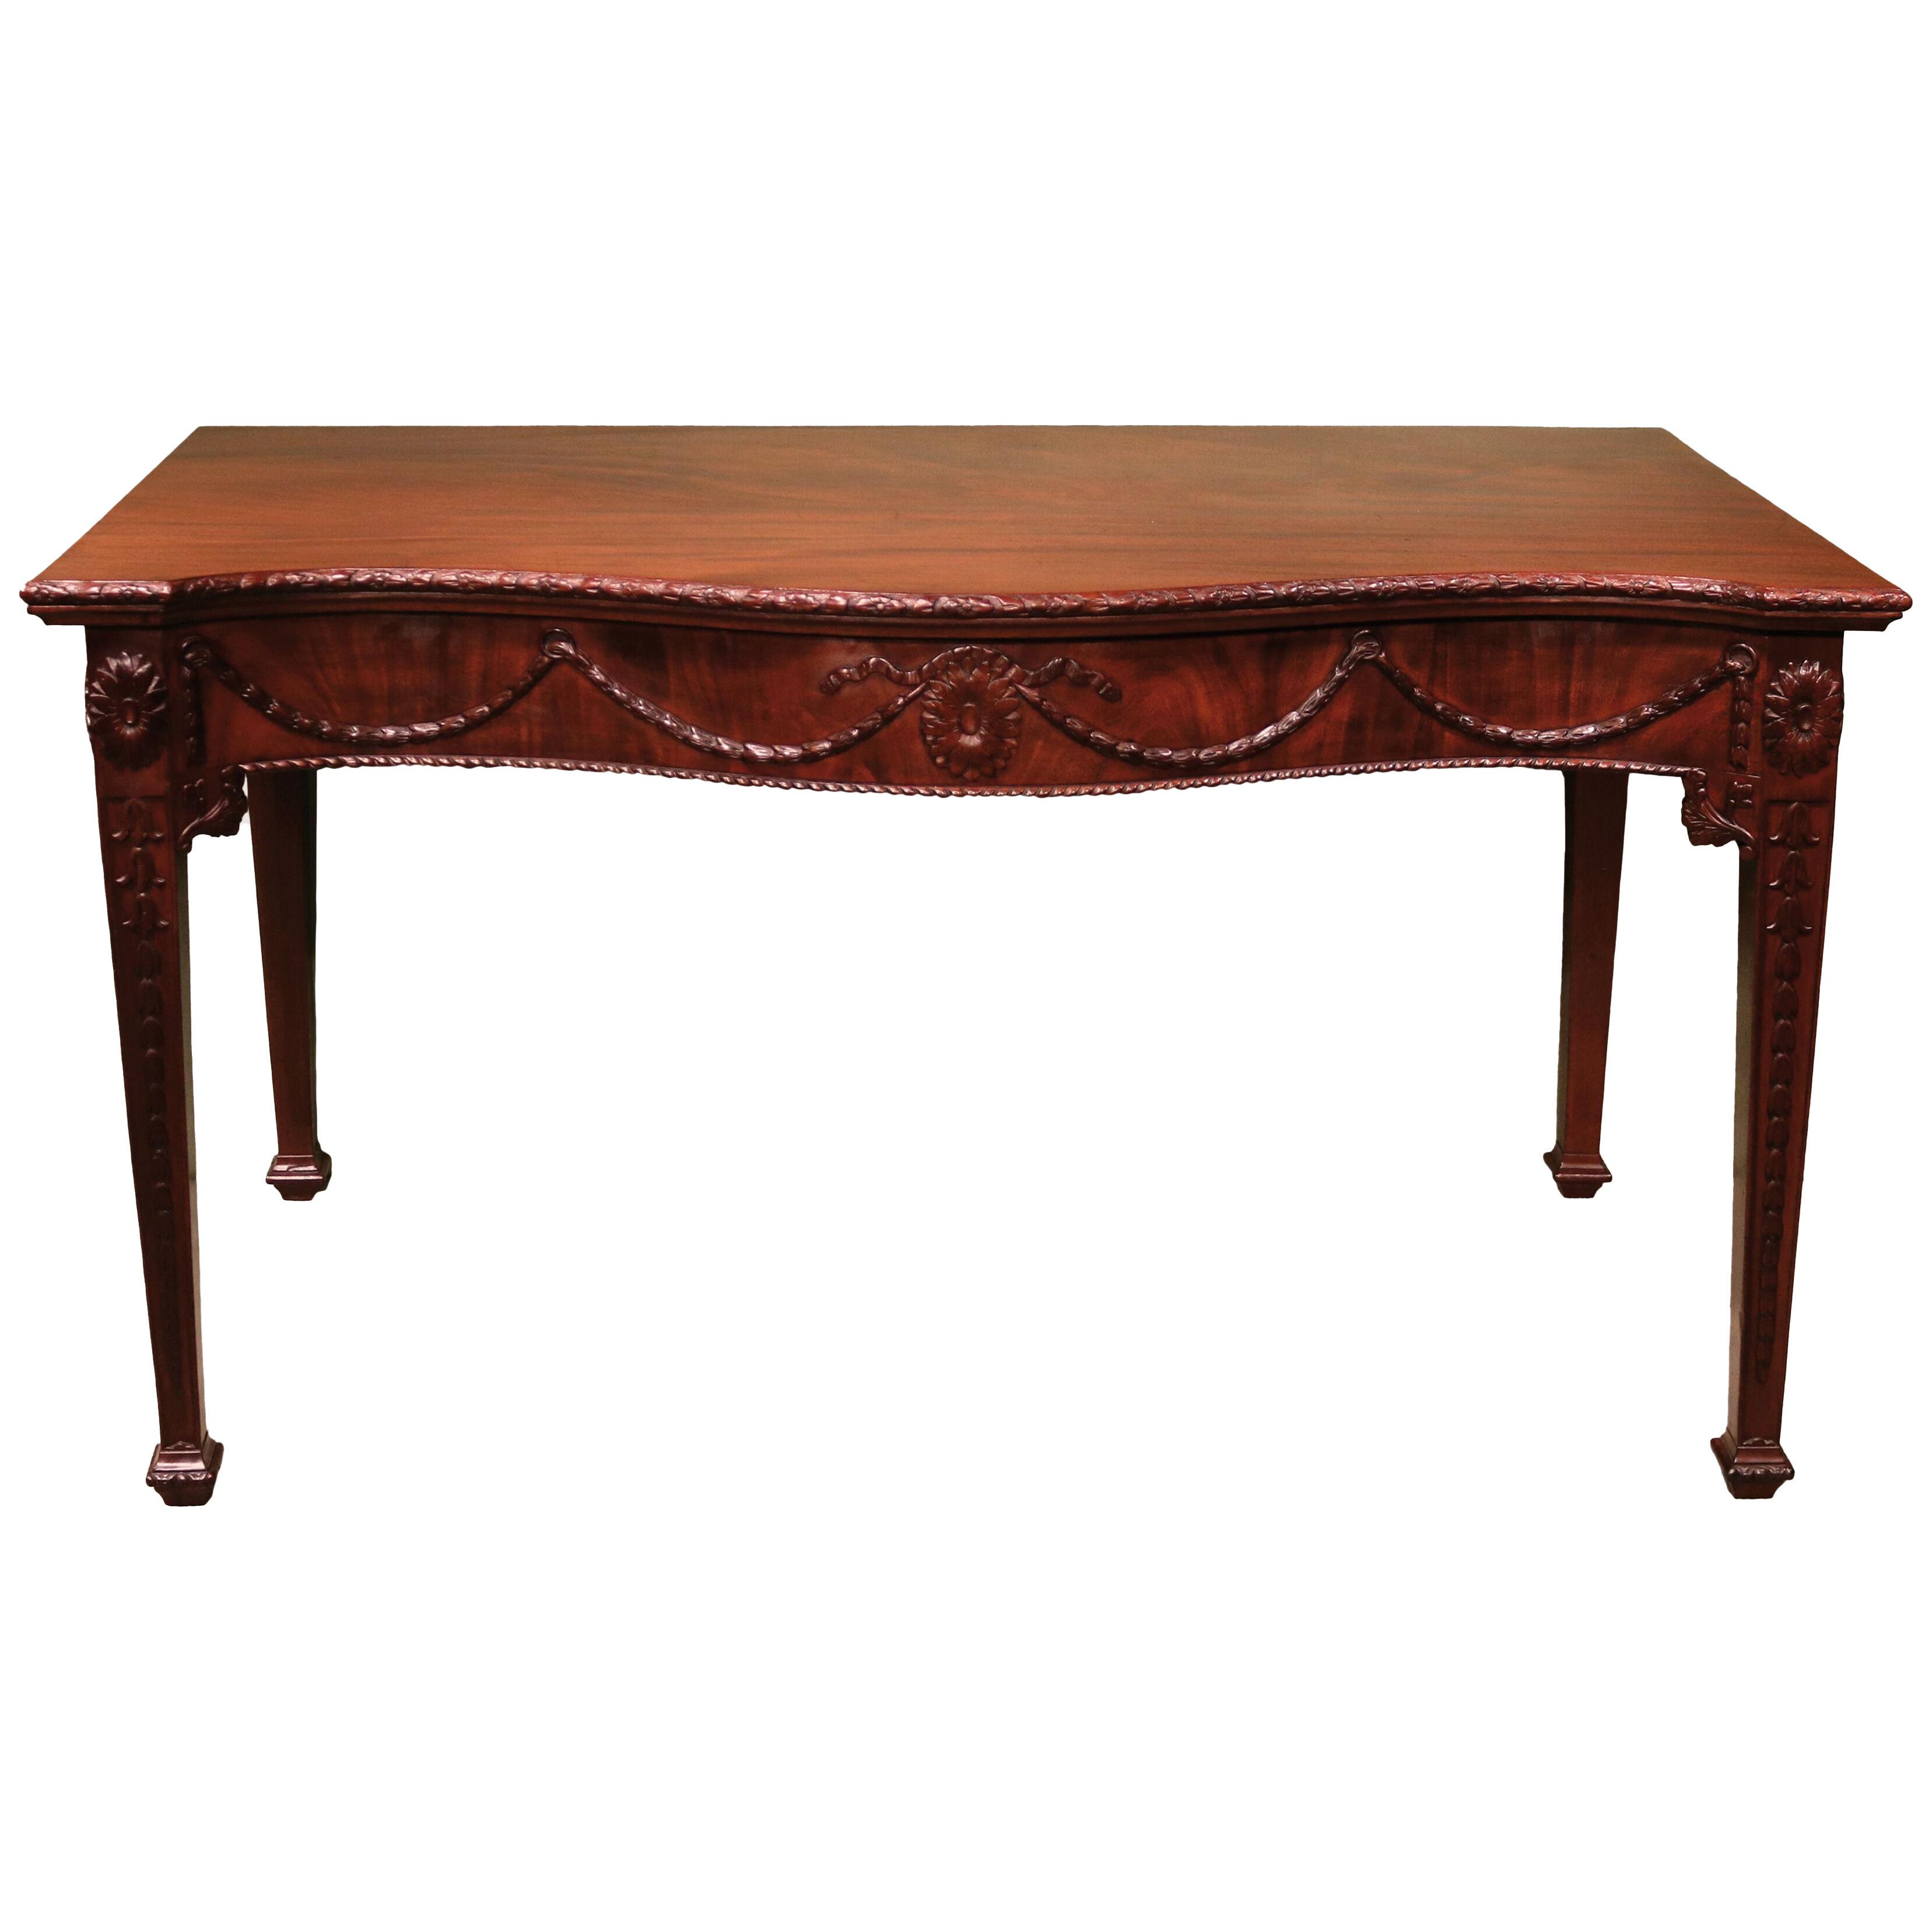 A George III period carved mahogany serpentine serving table.